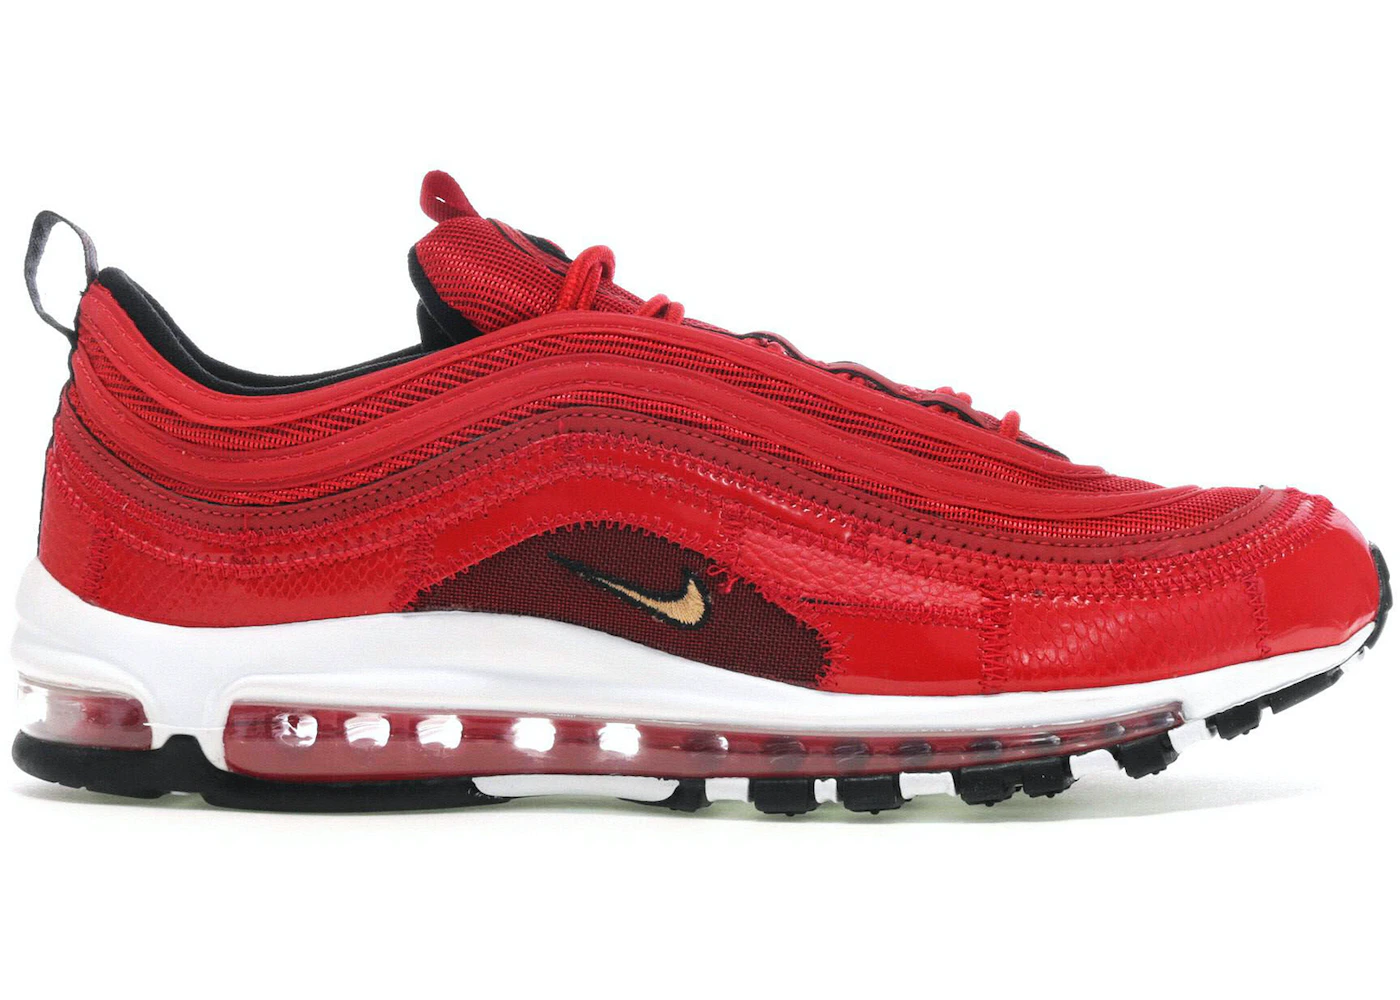 straal blootstelling bespotten Nike Air Max 97 Cristiano Ronaldo Portugal Patchwork Men's - AQ0655-600 - US